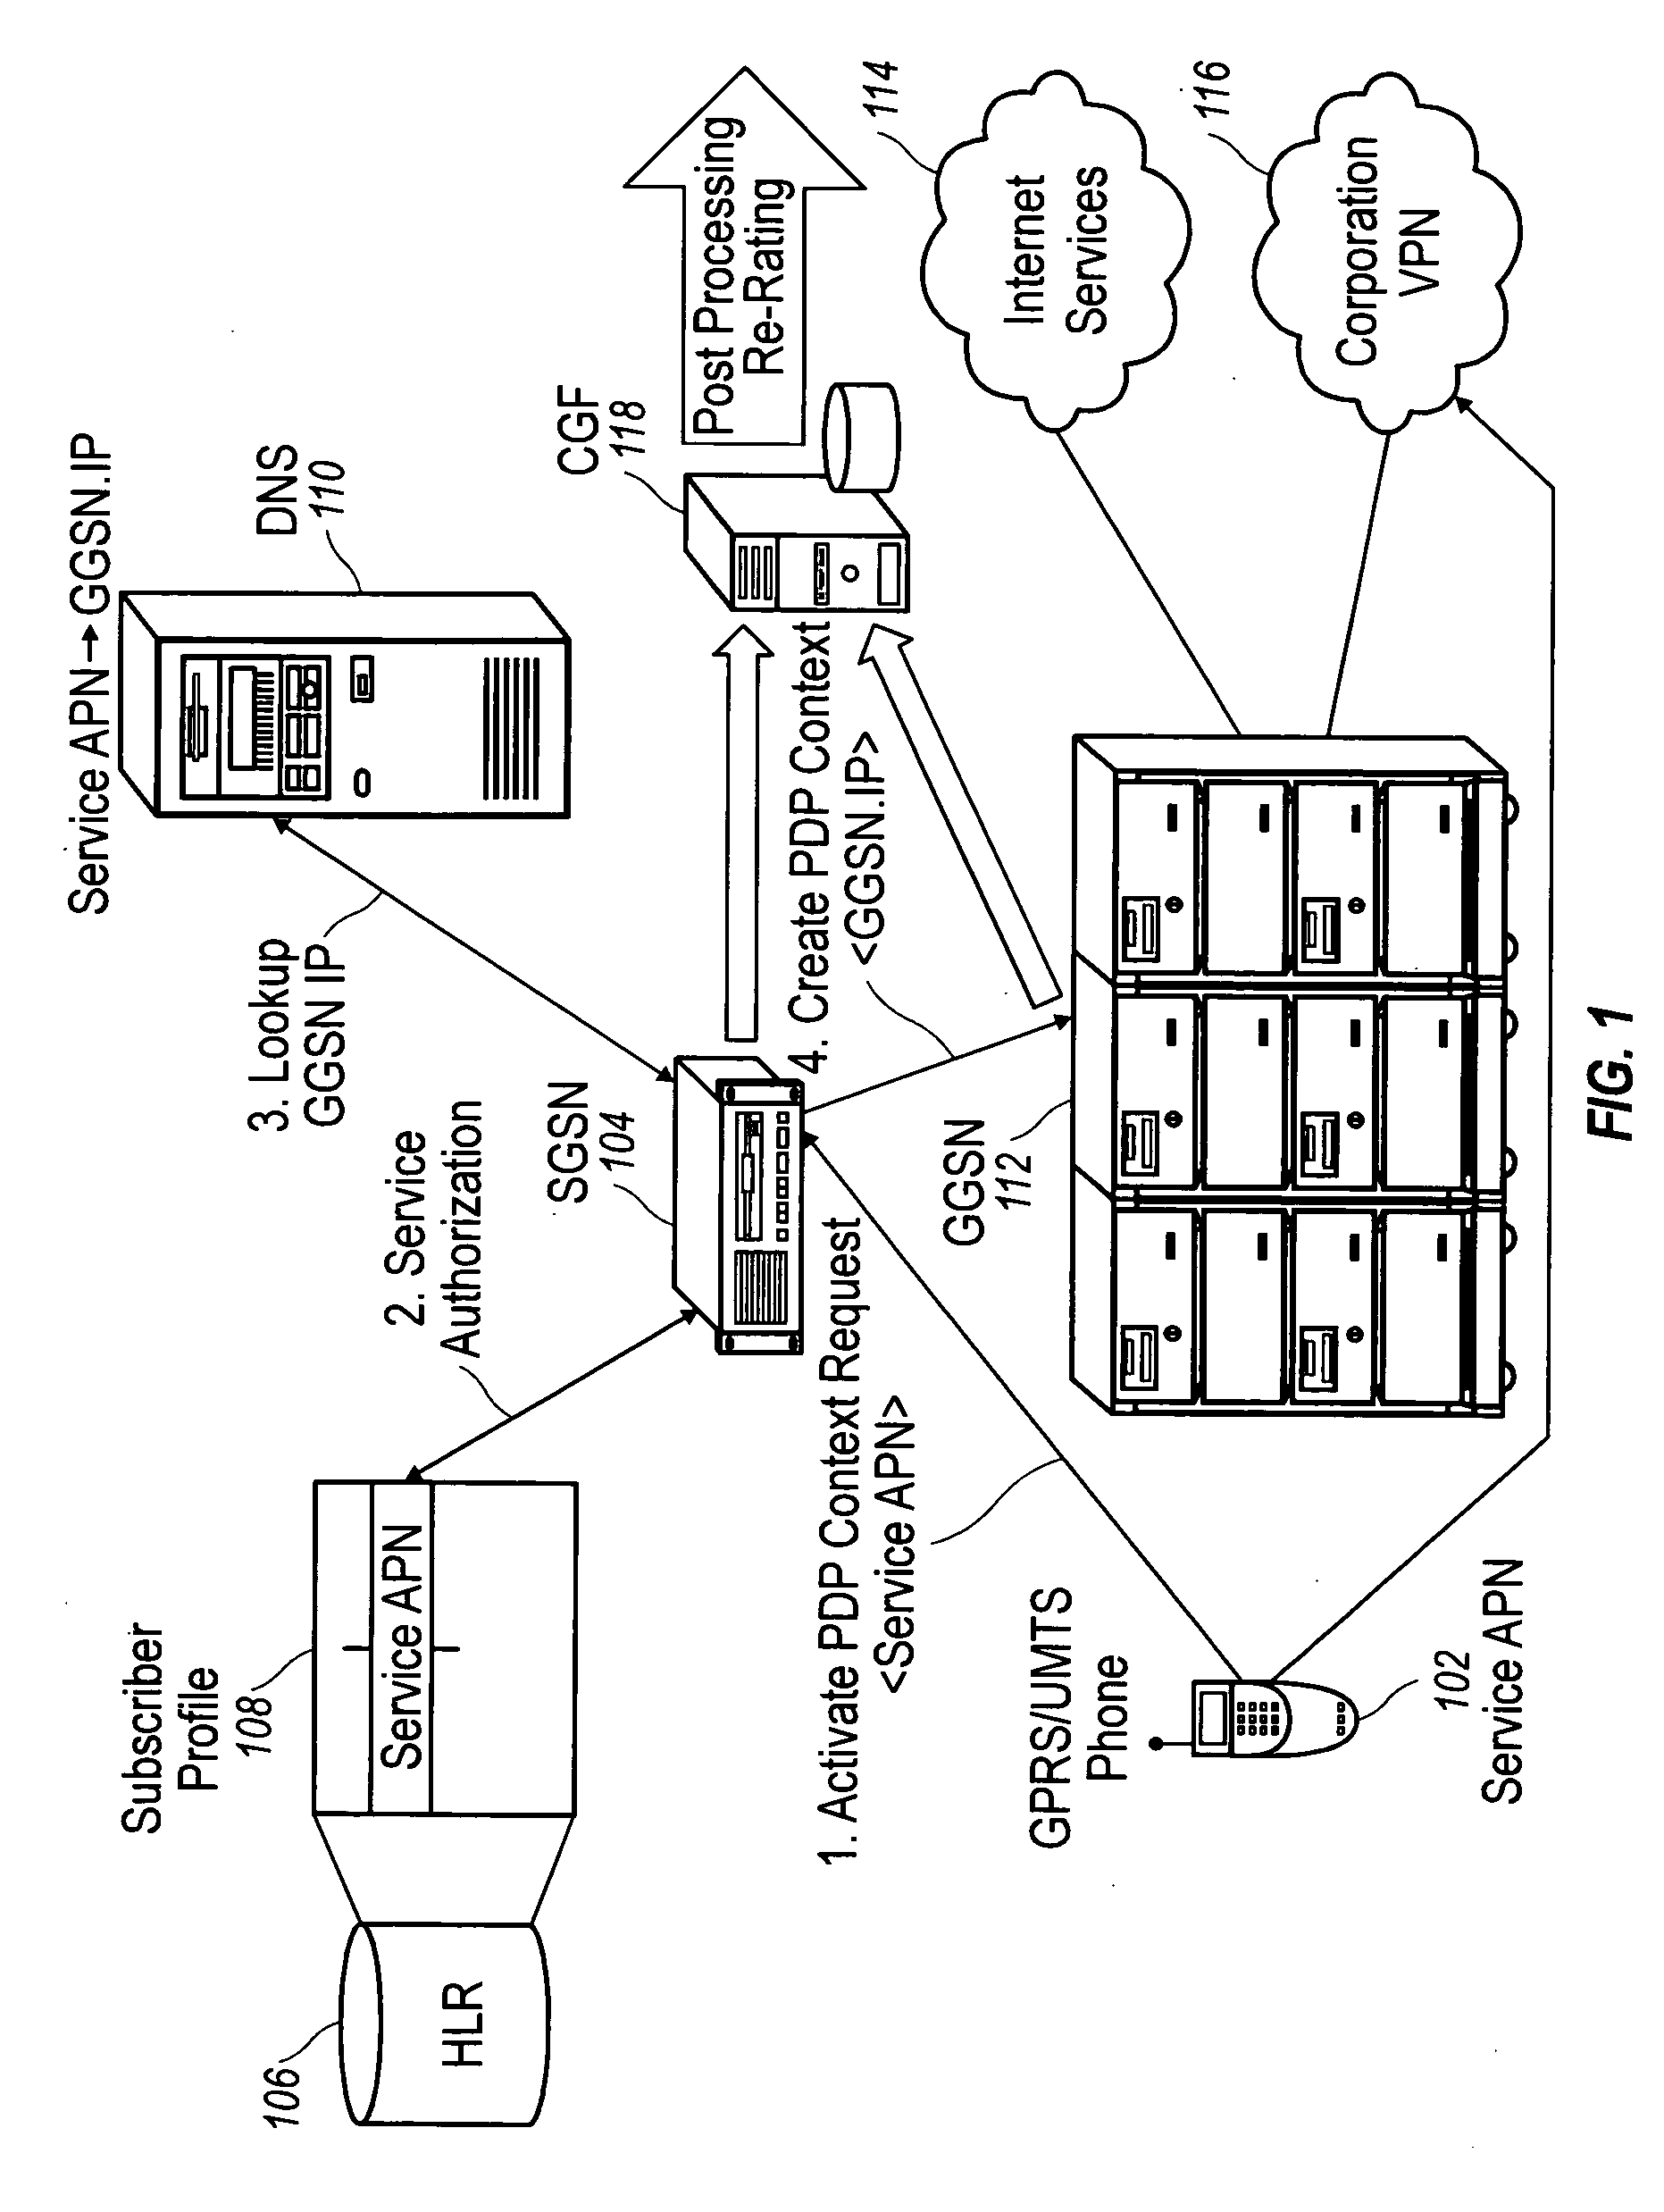 Service authorization in a Wi-Fi network interworked with 3G/GSM network